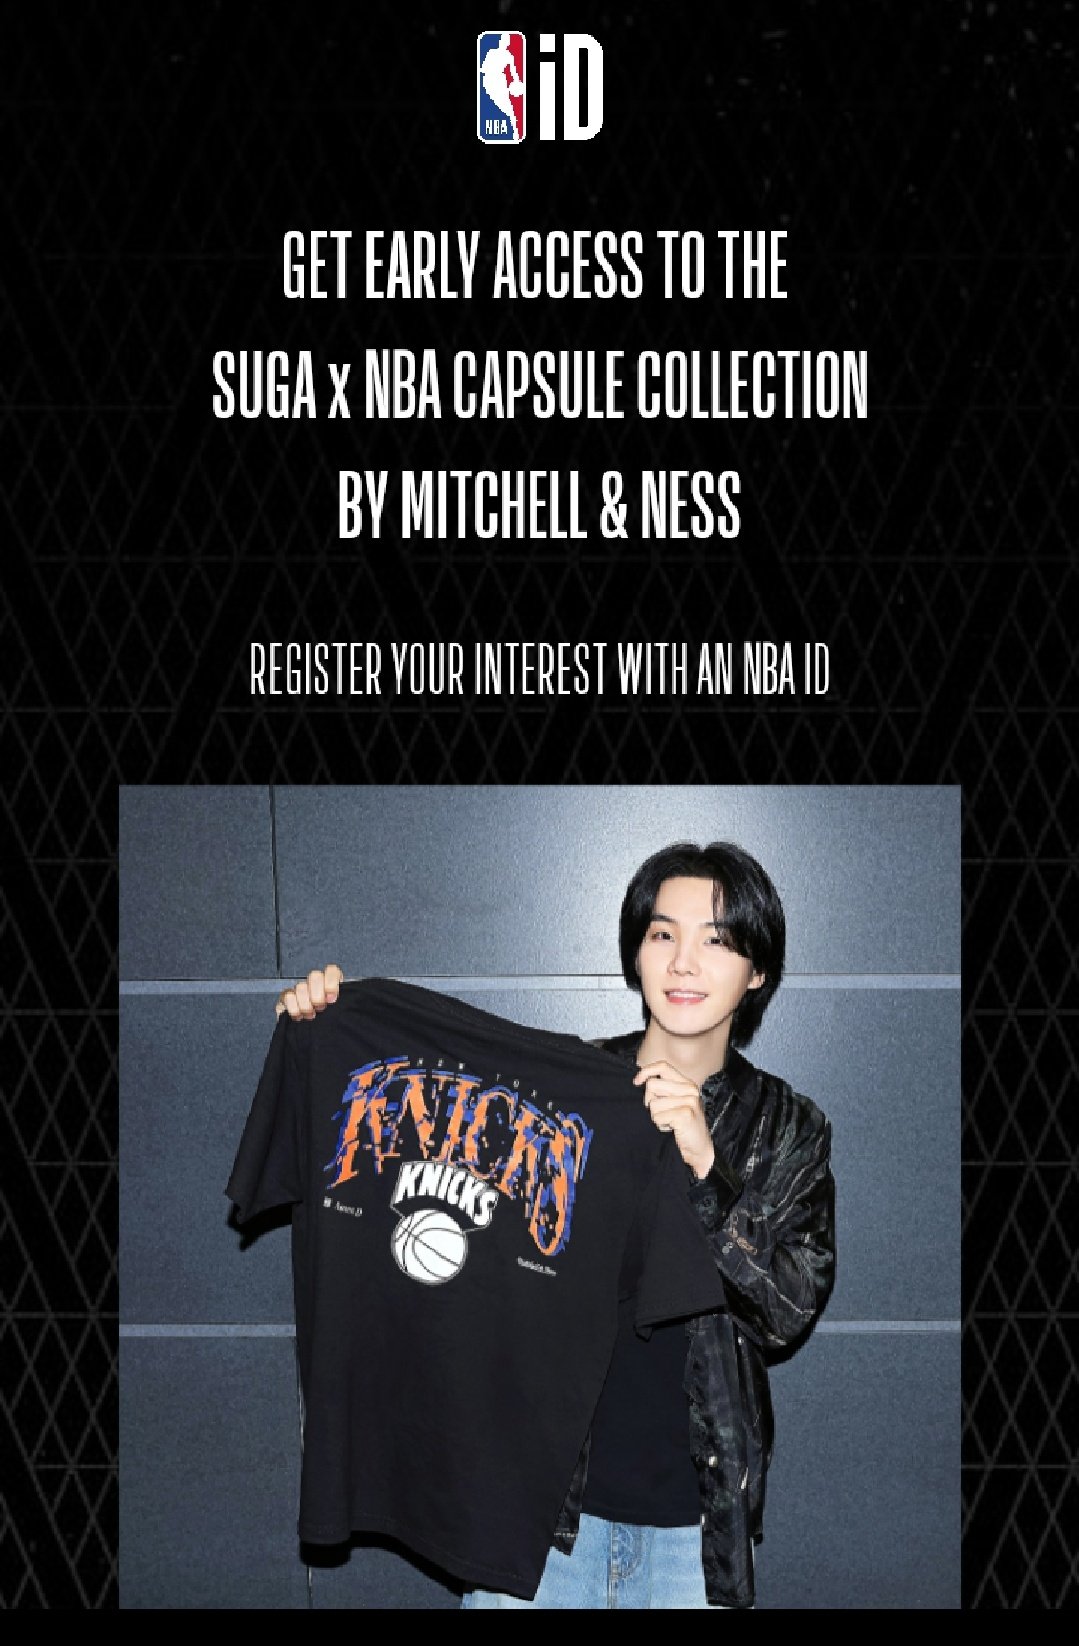 D-636 SUGA WORLDWIDE UNION 🌏 (fan account) on X: #SUGA, NBA Ambassador,  will lauch a NBA capsule collection by Mitchell & Ness. - T-shirts -  Hoodies - Jackets - Shorts - Hats #